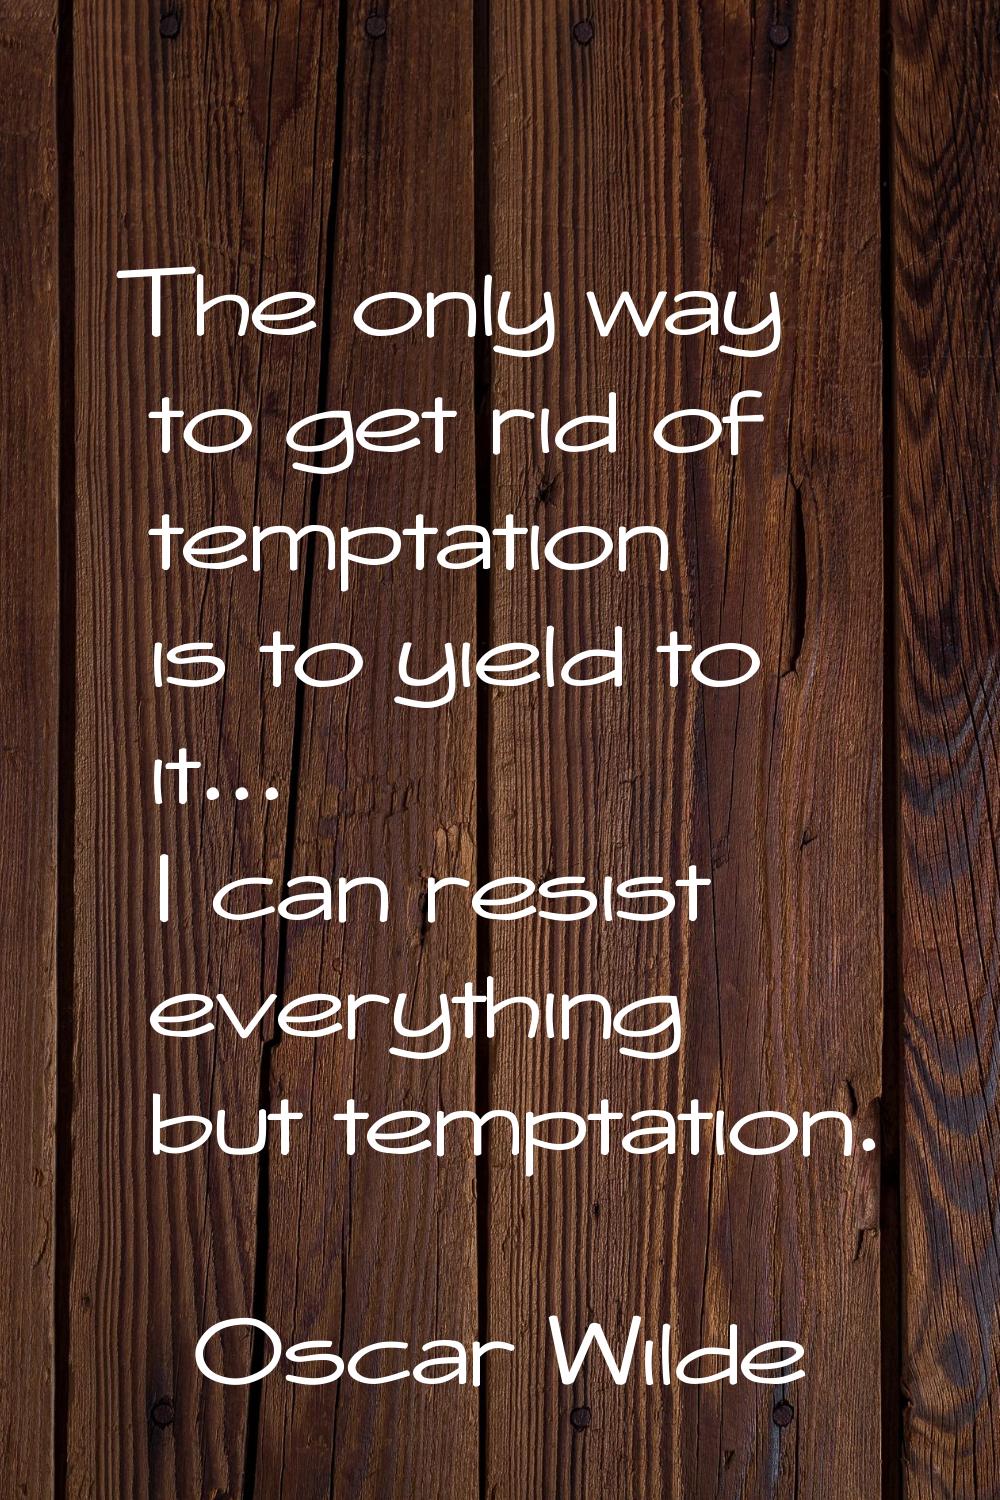 The only way to get rid of temptation is to yield to it... I can resist everything but temptation.